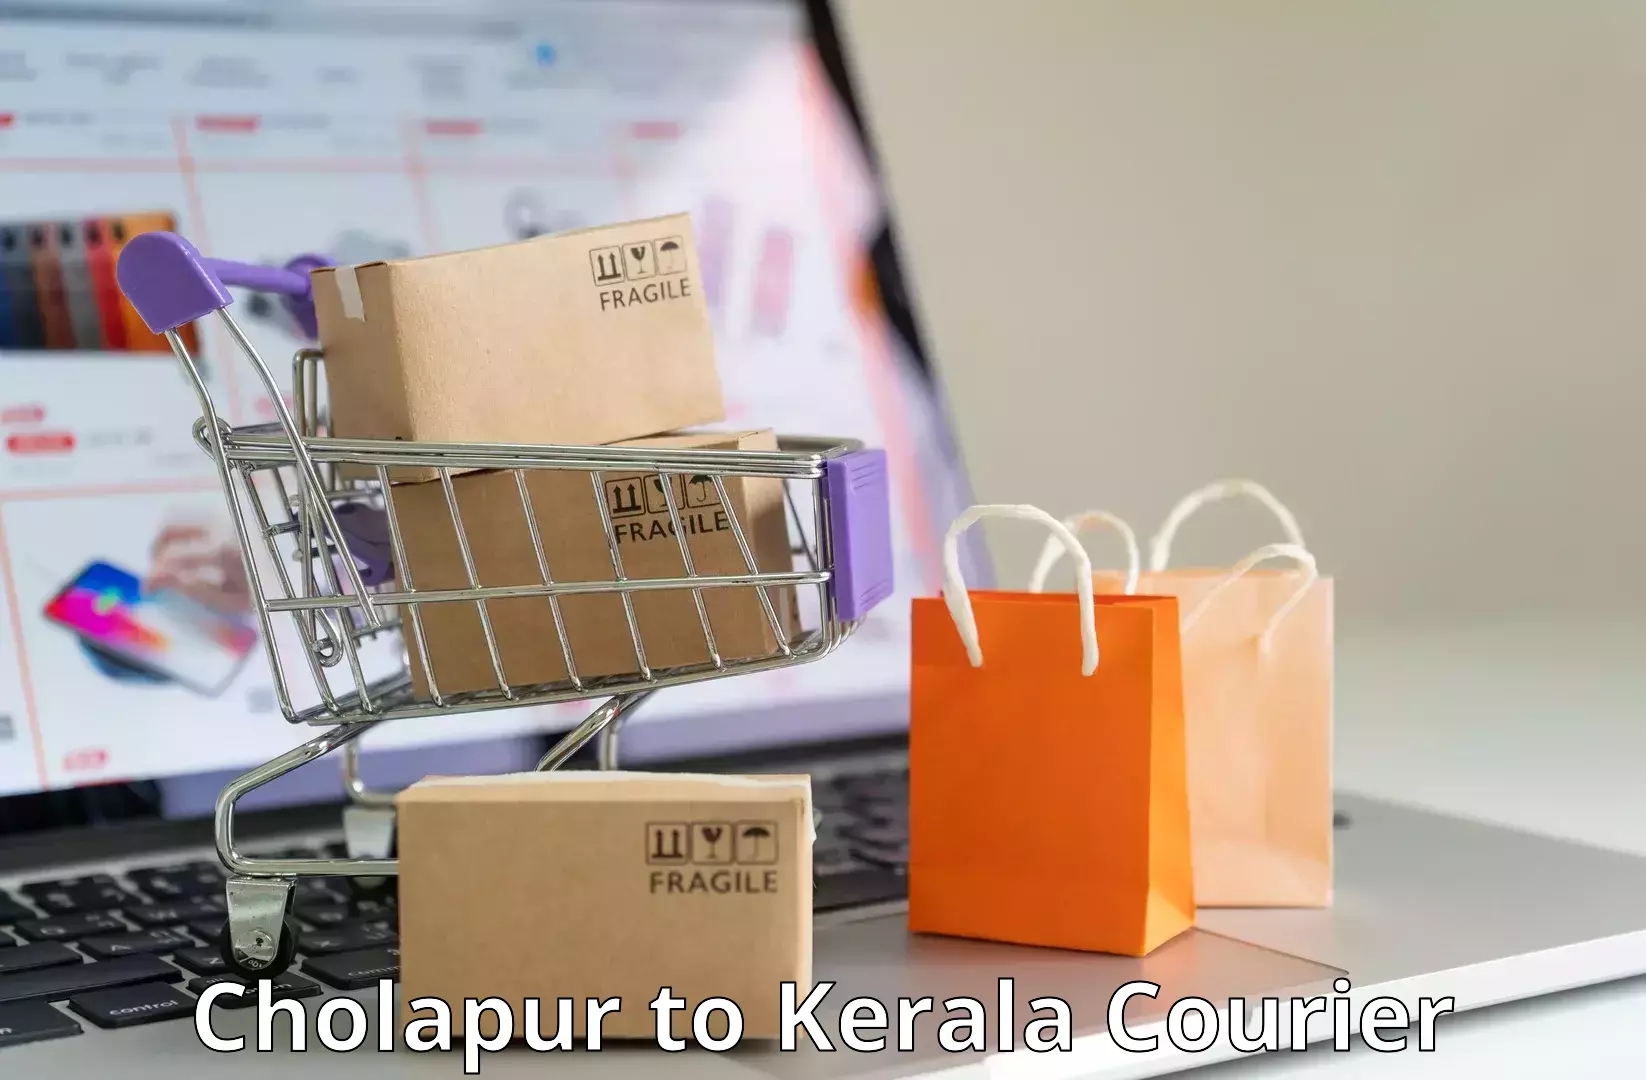 Courier service booking Cholapur to Ponnani